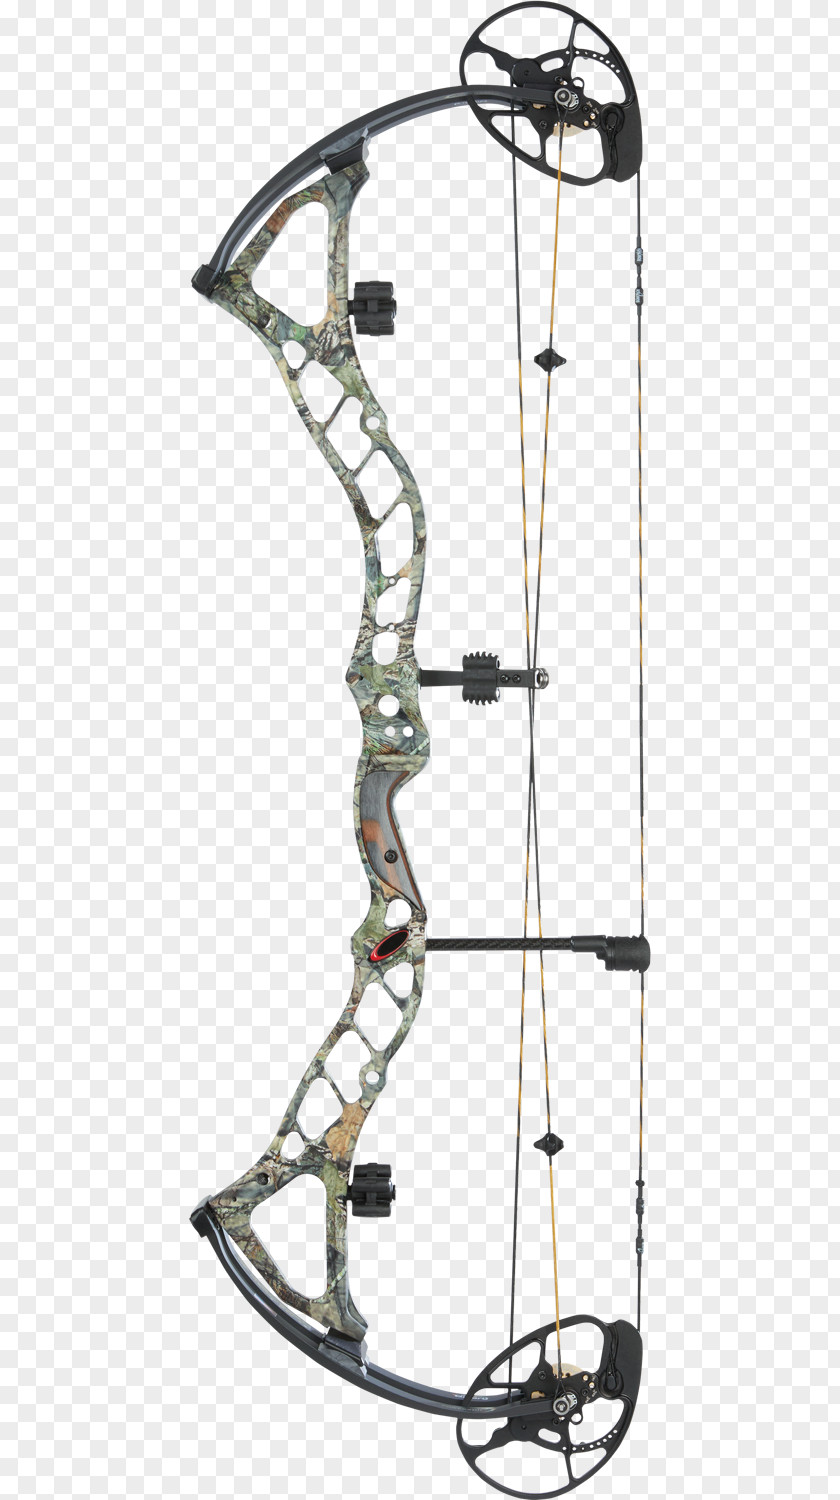 Compound Bows Binary Cam Archery Hunting Bow And Arrow PNG